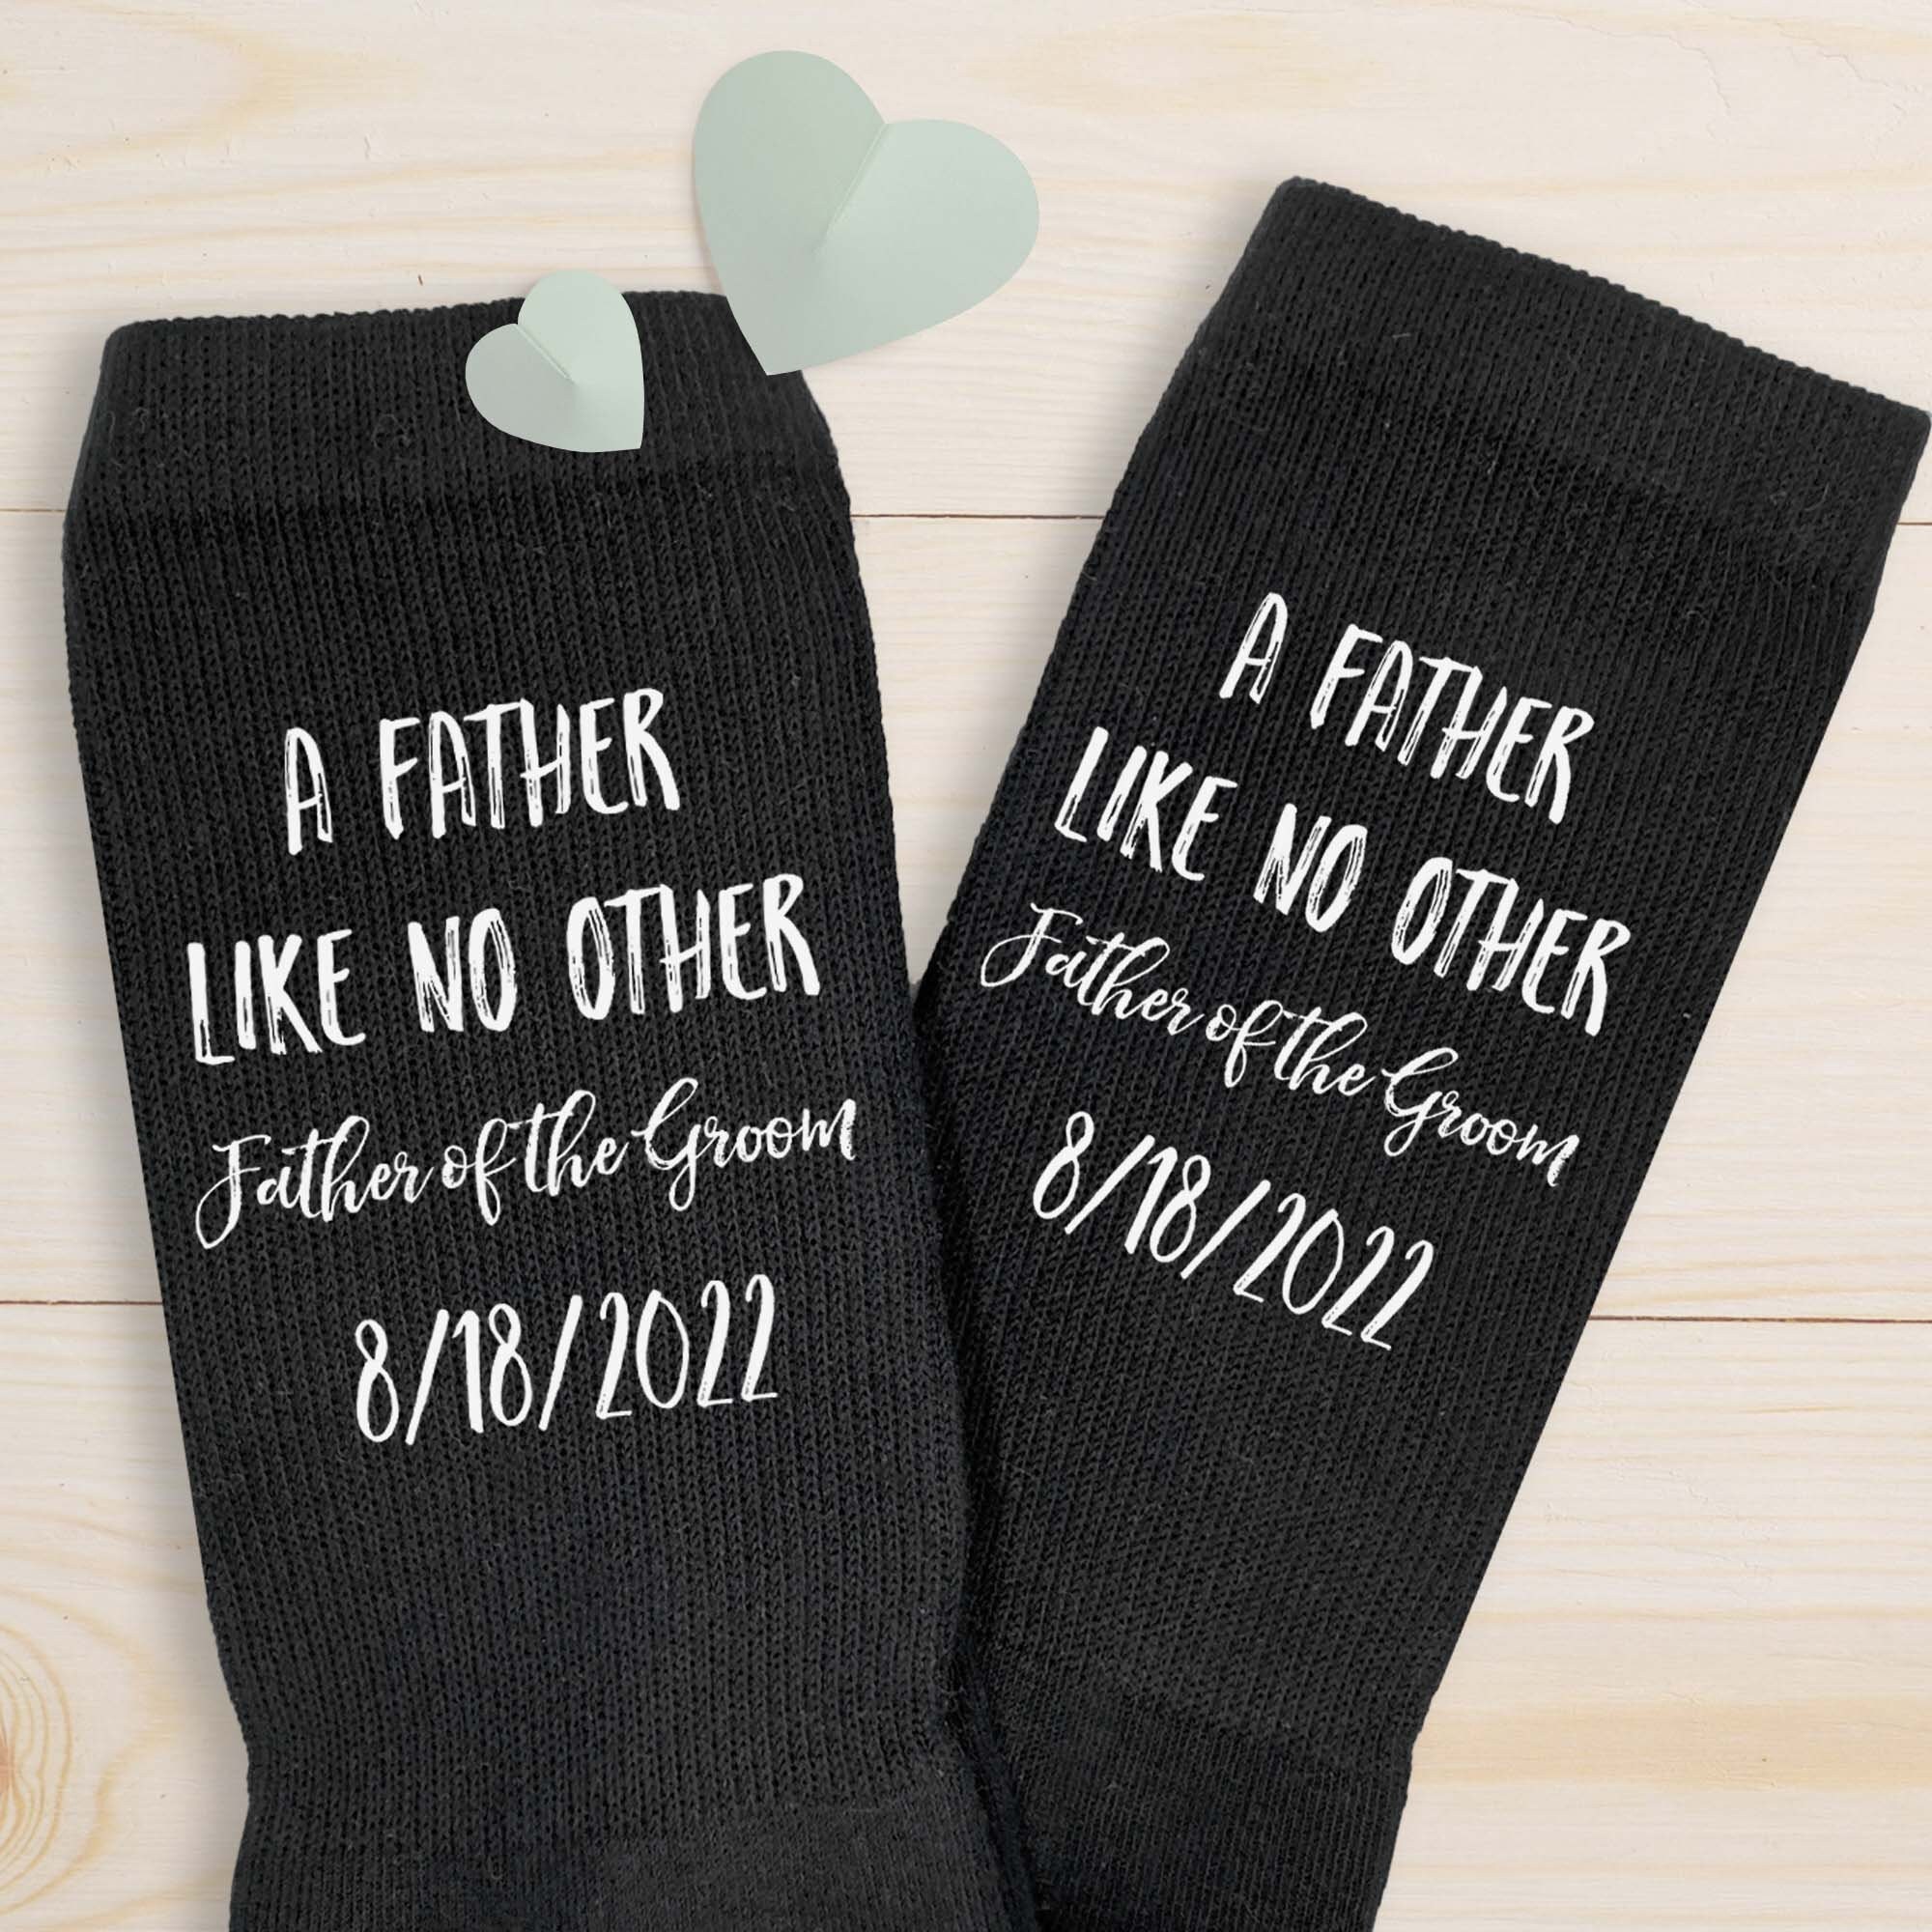 Father of the Groom Gift of Personalized Wedding Socks, Father of the Groom  Gift From Groom, Custom Dad Wedding Socks for Groom's Father 